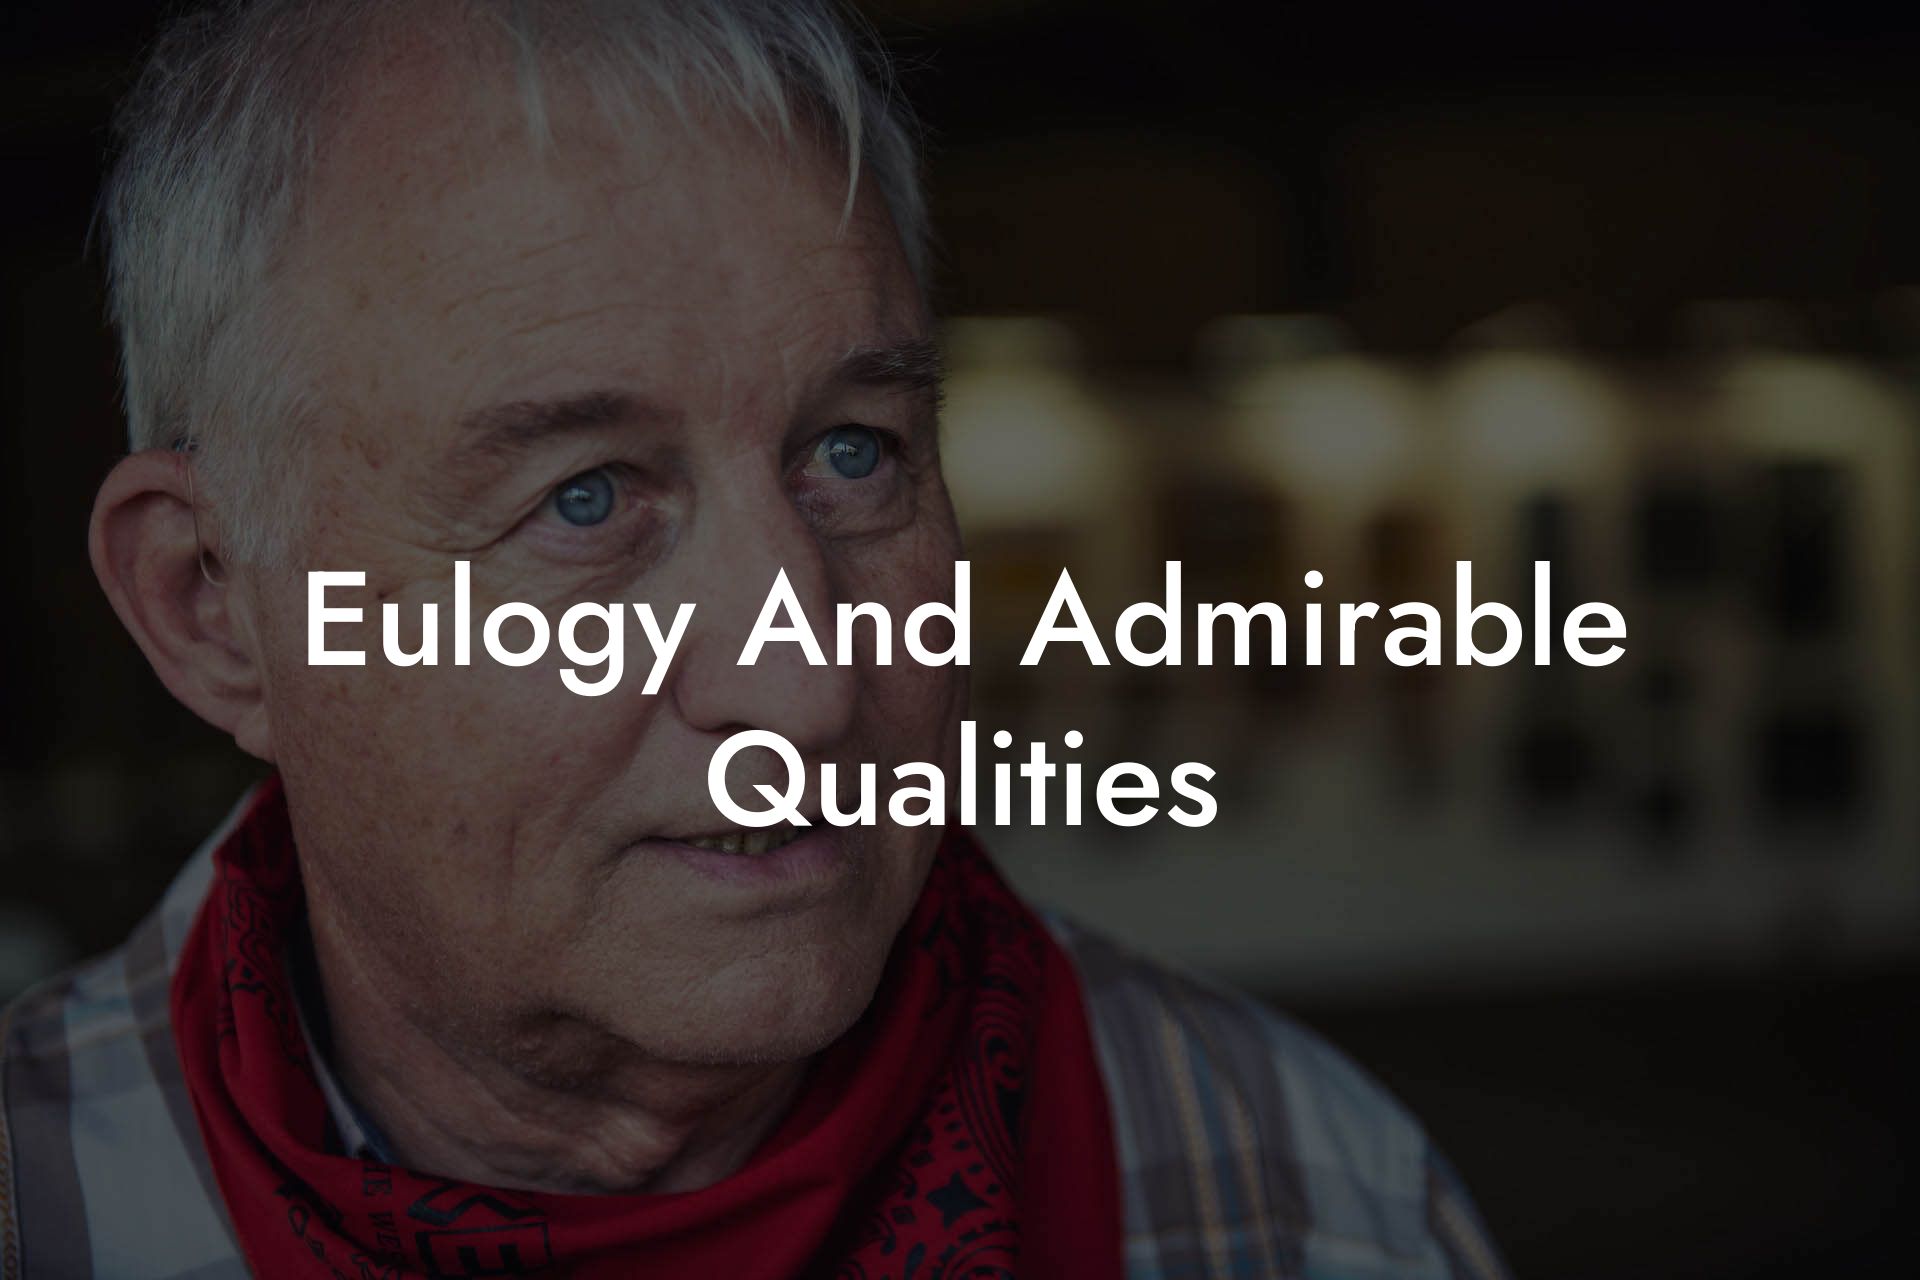 Eulogy And Admirable Qualities